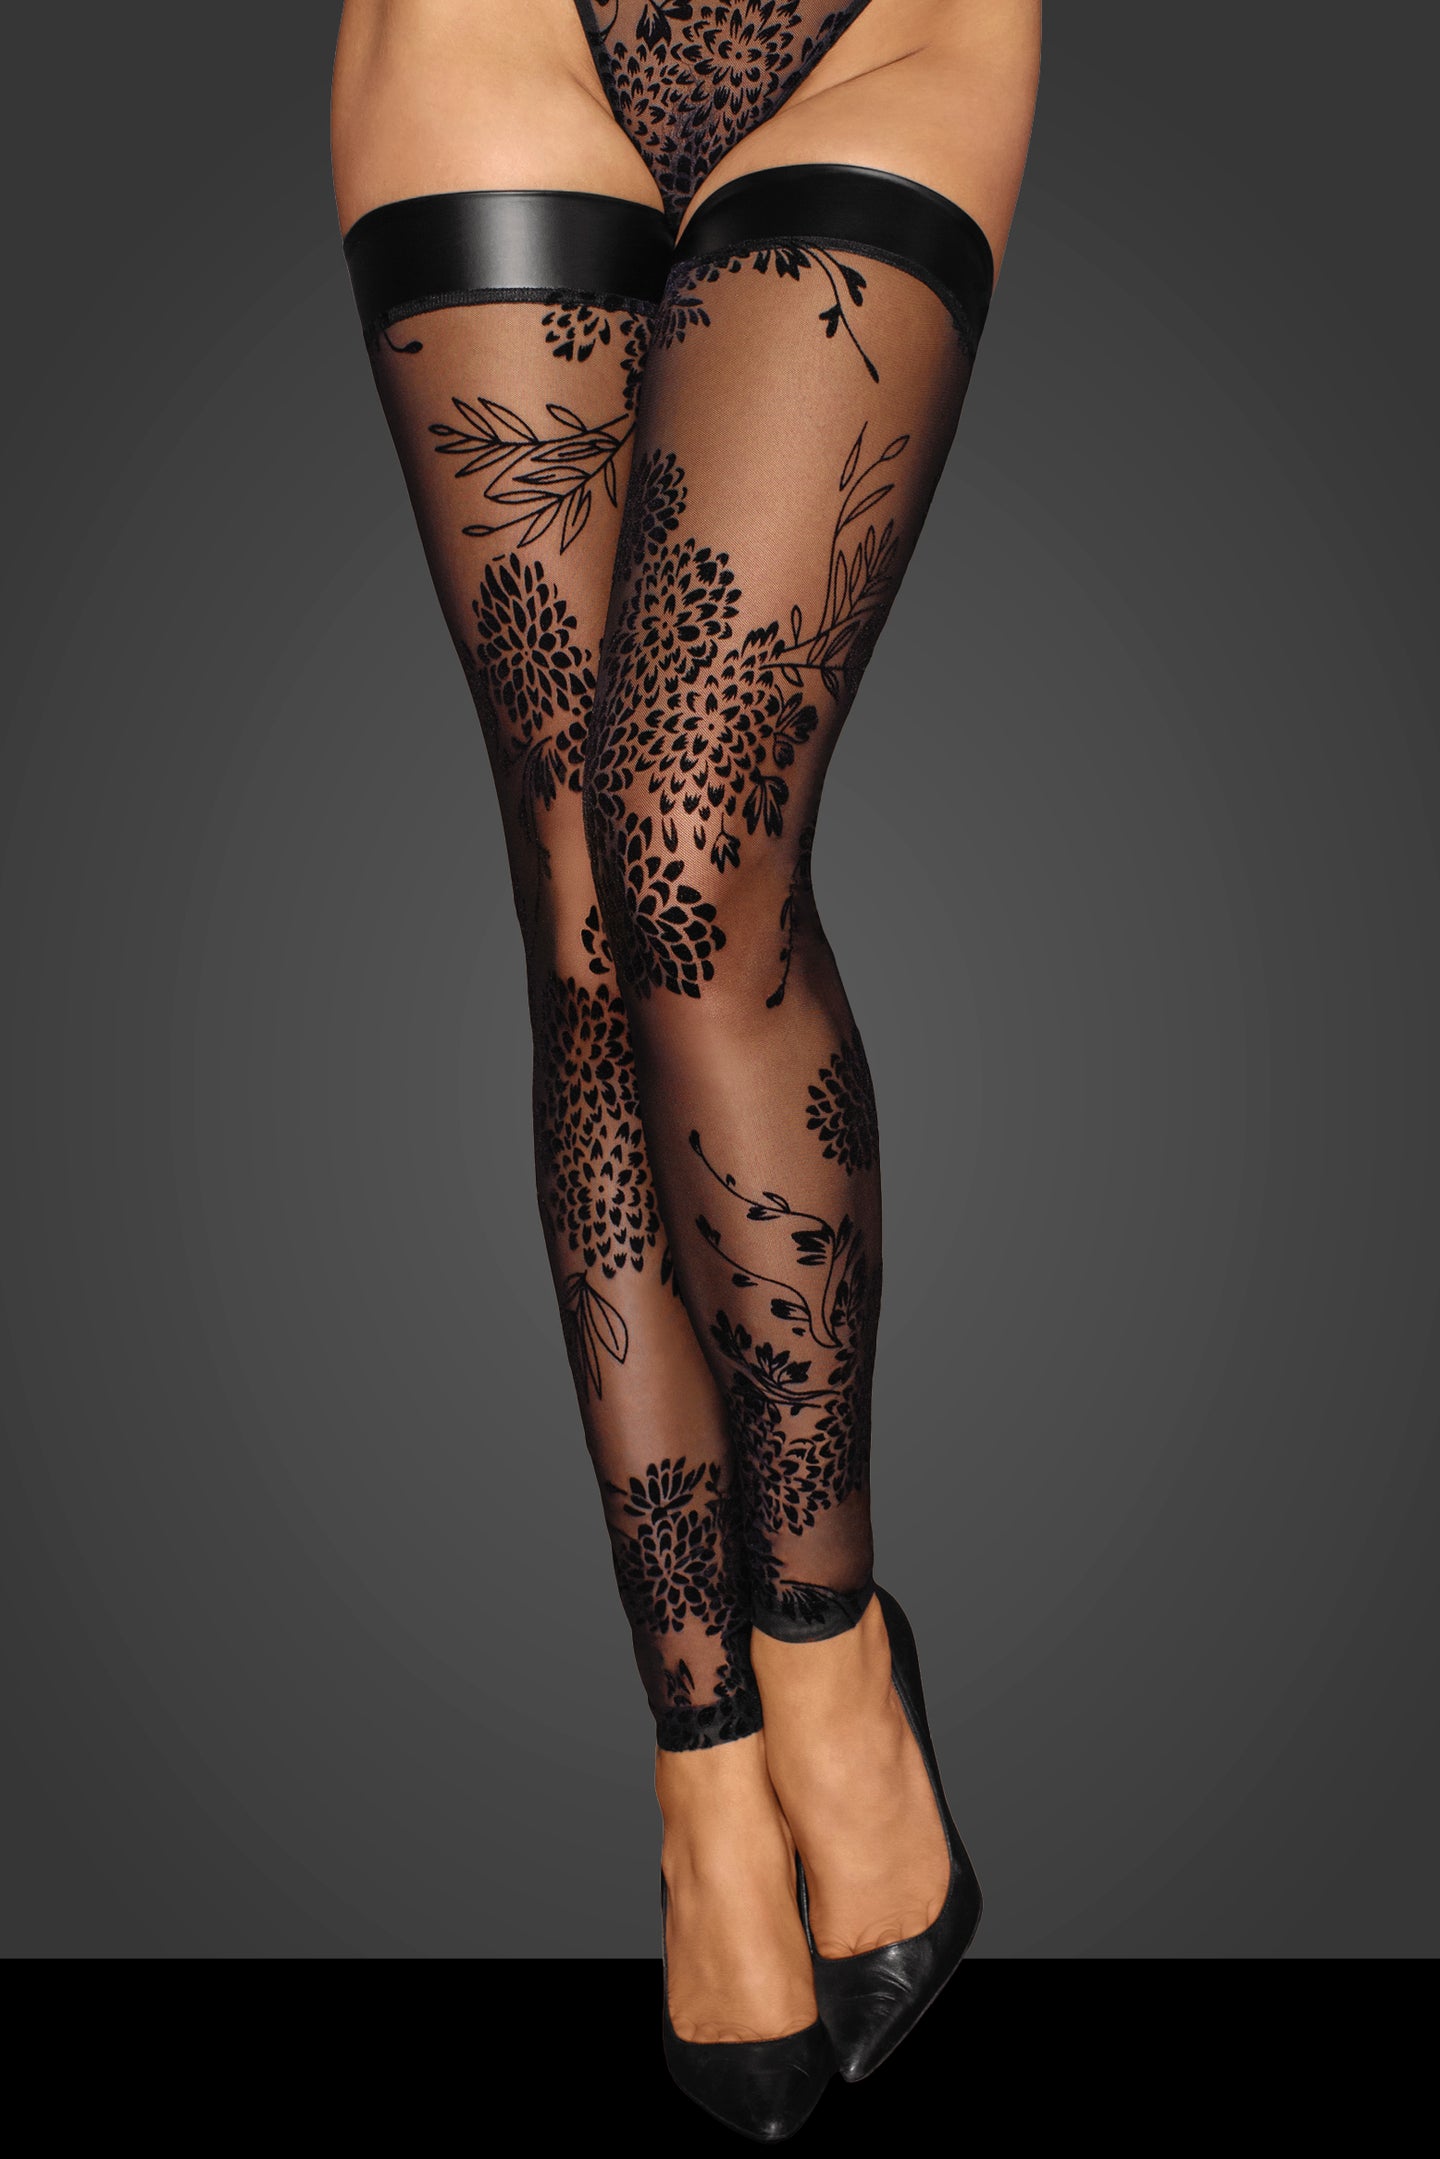 Wetlook stockings with floral pattern